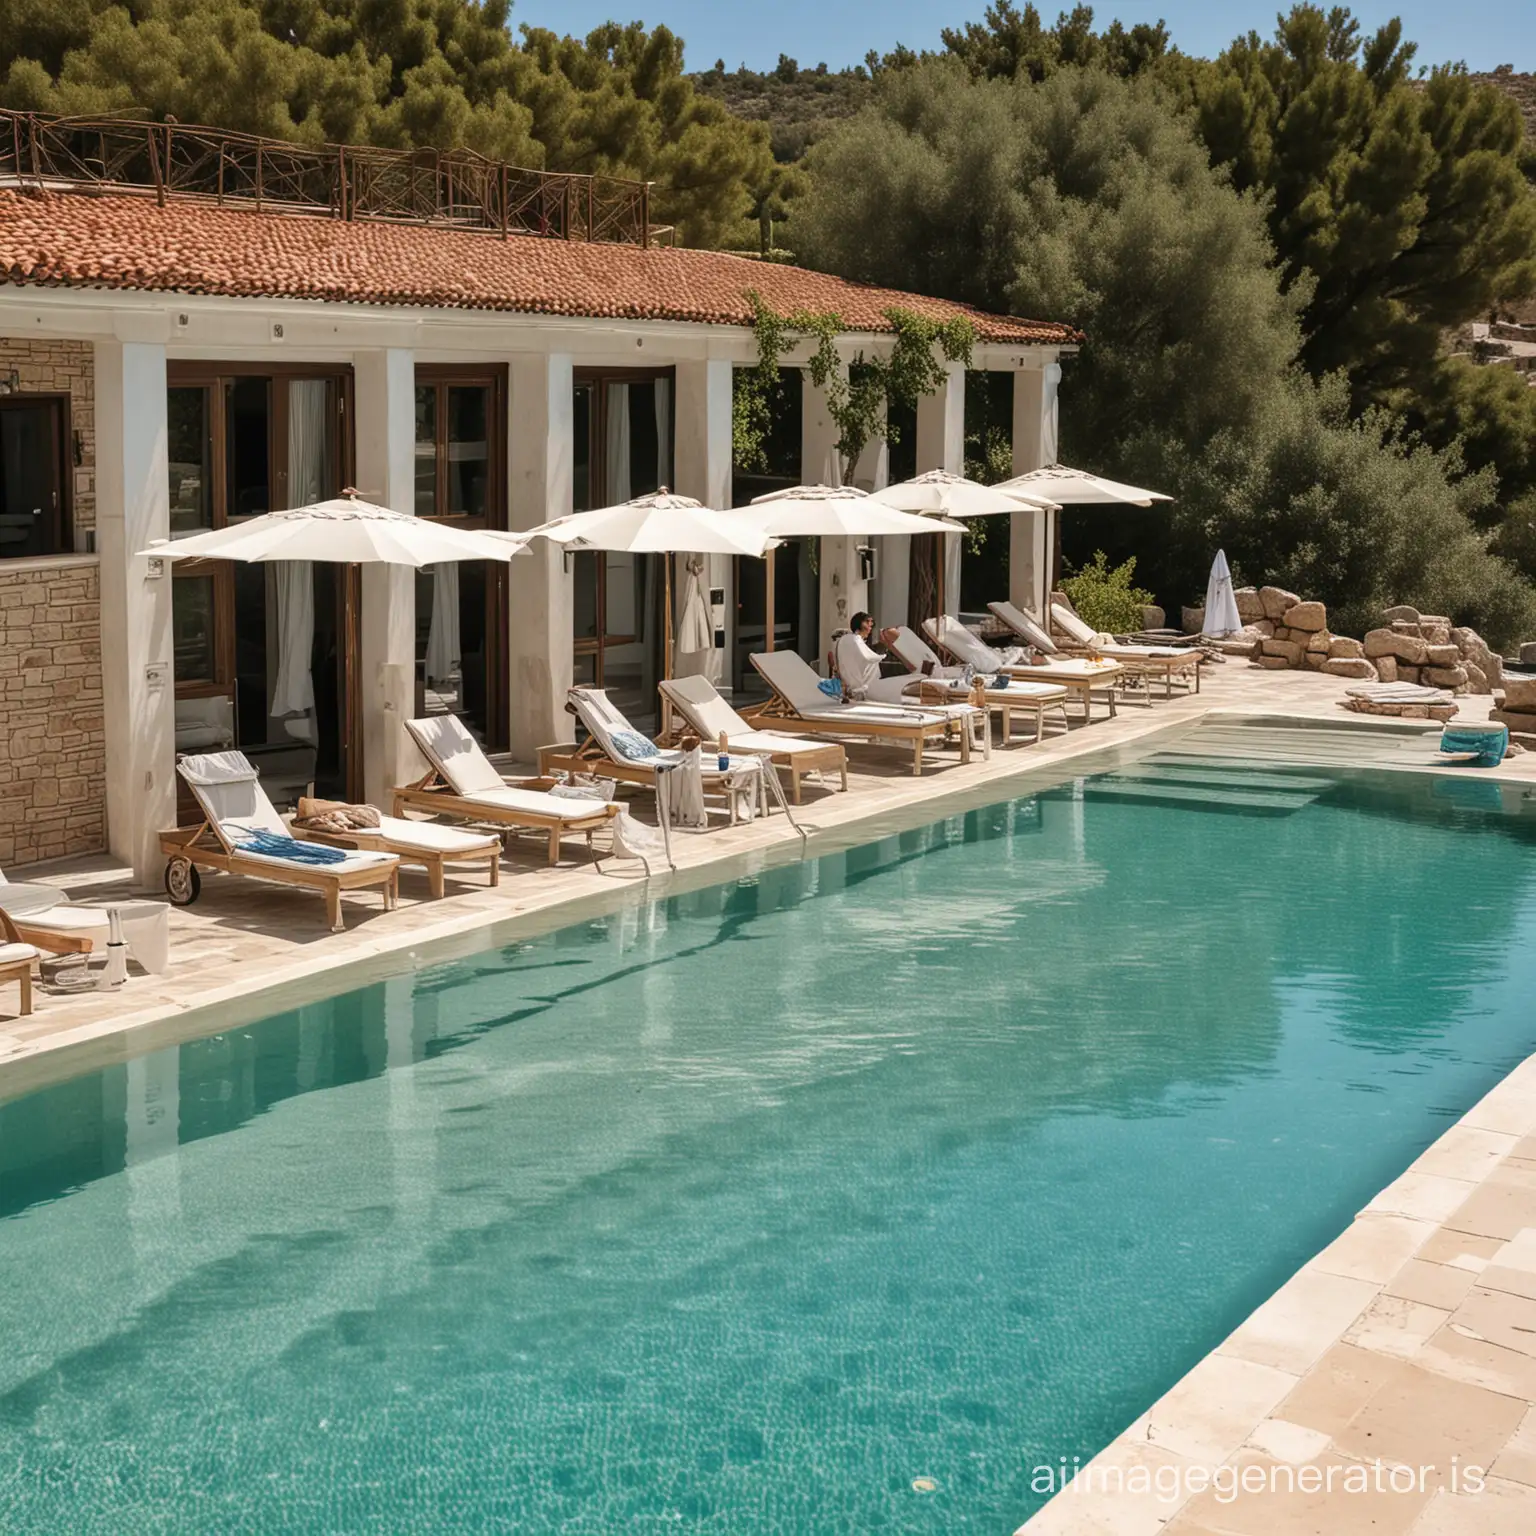 Vibrant-Poolside-Scene-at-5Star-Hotel-Greek-Island-of-Chios